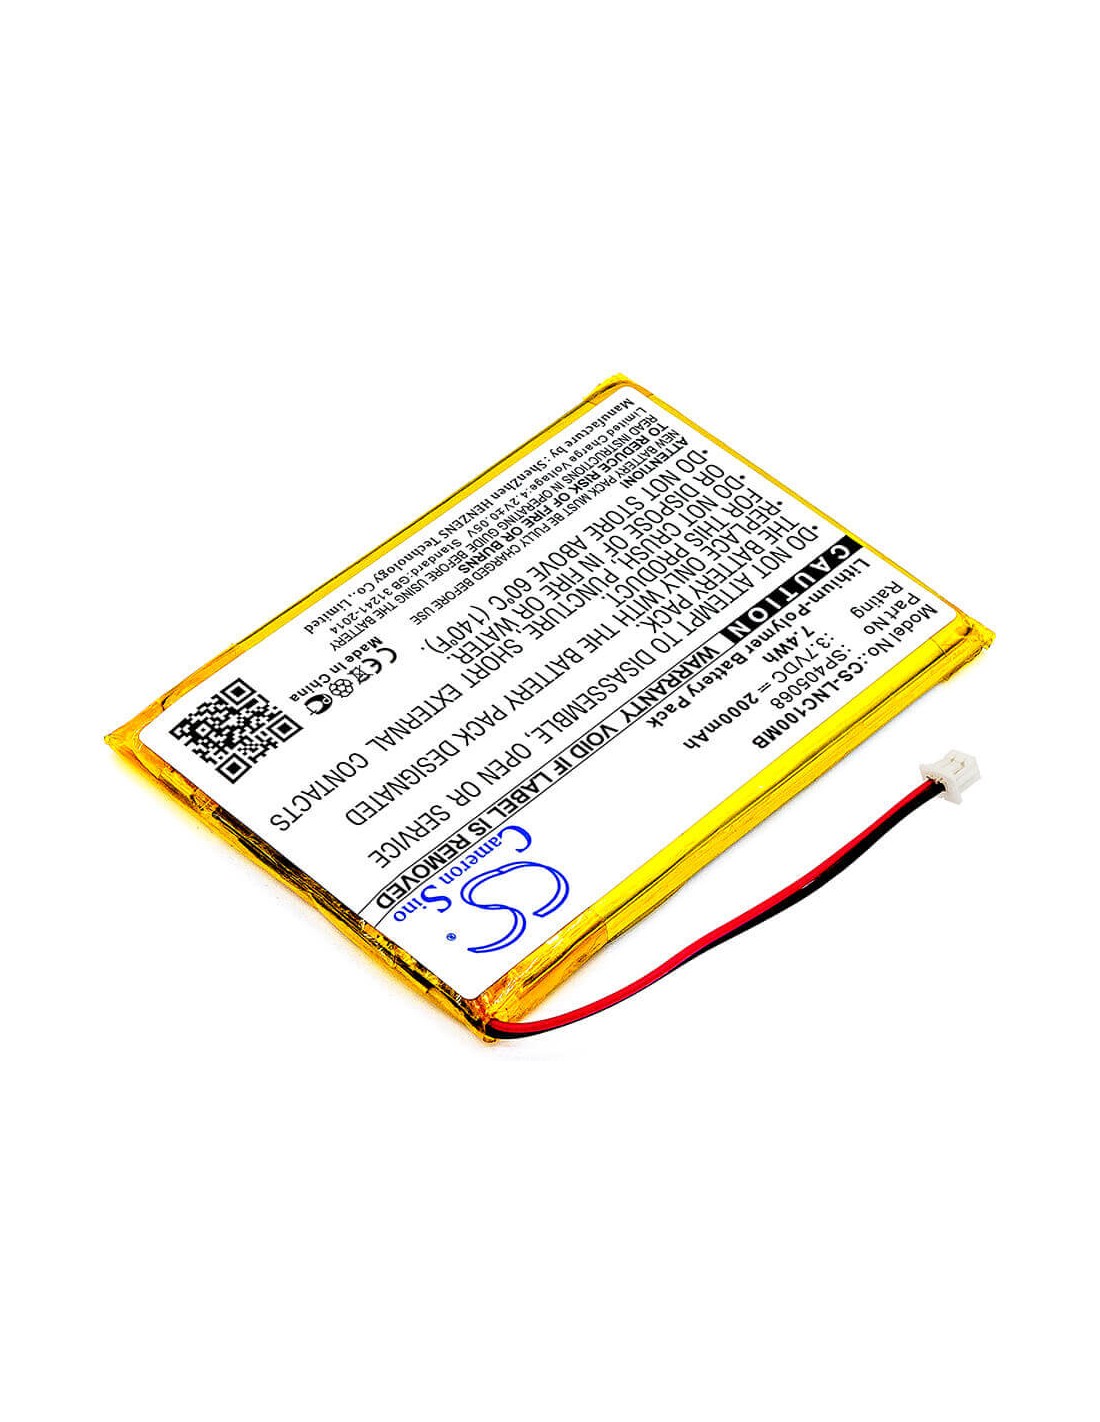 Battery for Luvion, Prestige Touch, Supreme Connect 3.7V, 2000mAh - 7.40Wh